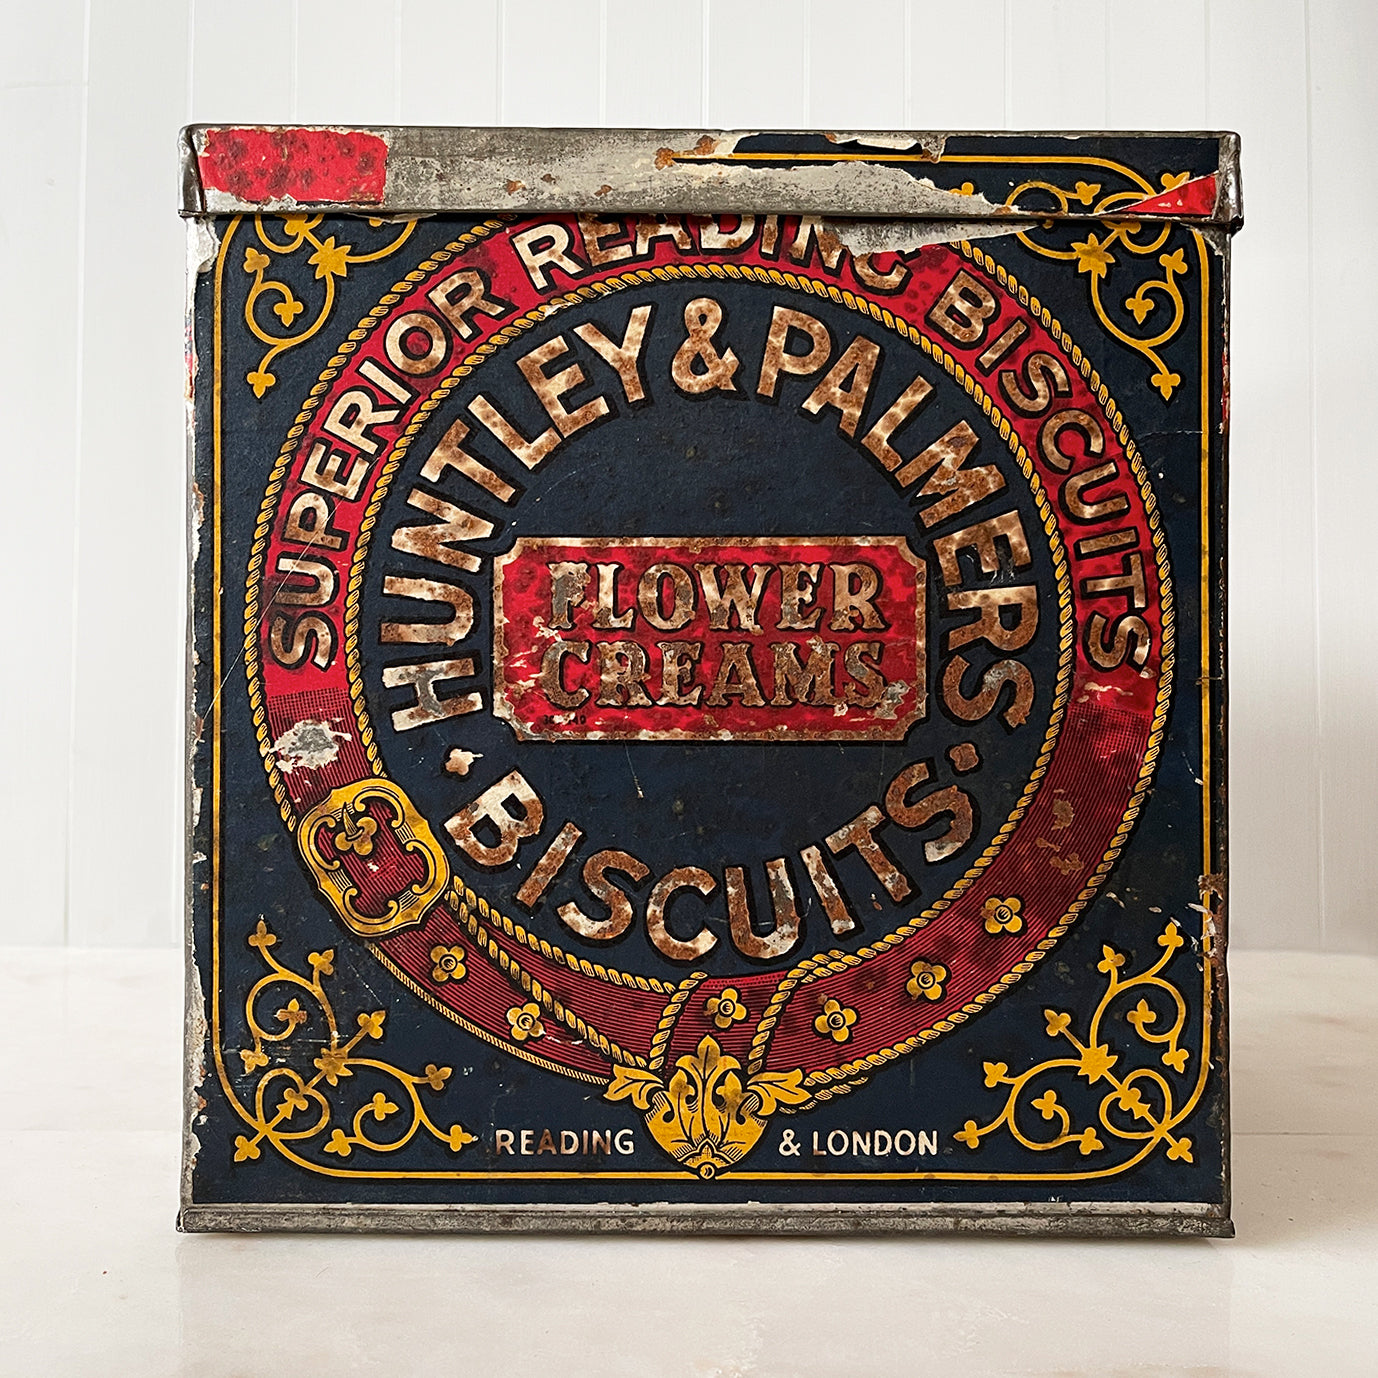 An Edwardian Huntley & Palmer’s large square Biscuit tin that would have been used in a shop to store biscuits for sale. Fantastic typography to the front with well preserved colourful print - SHOP NOW - www.intovintage.co.uk